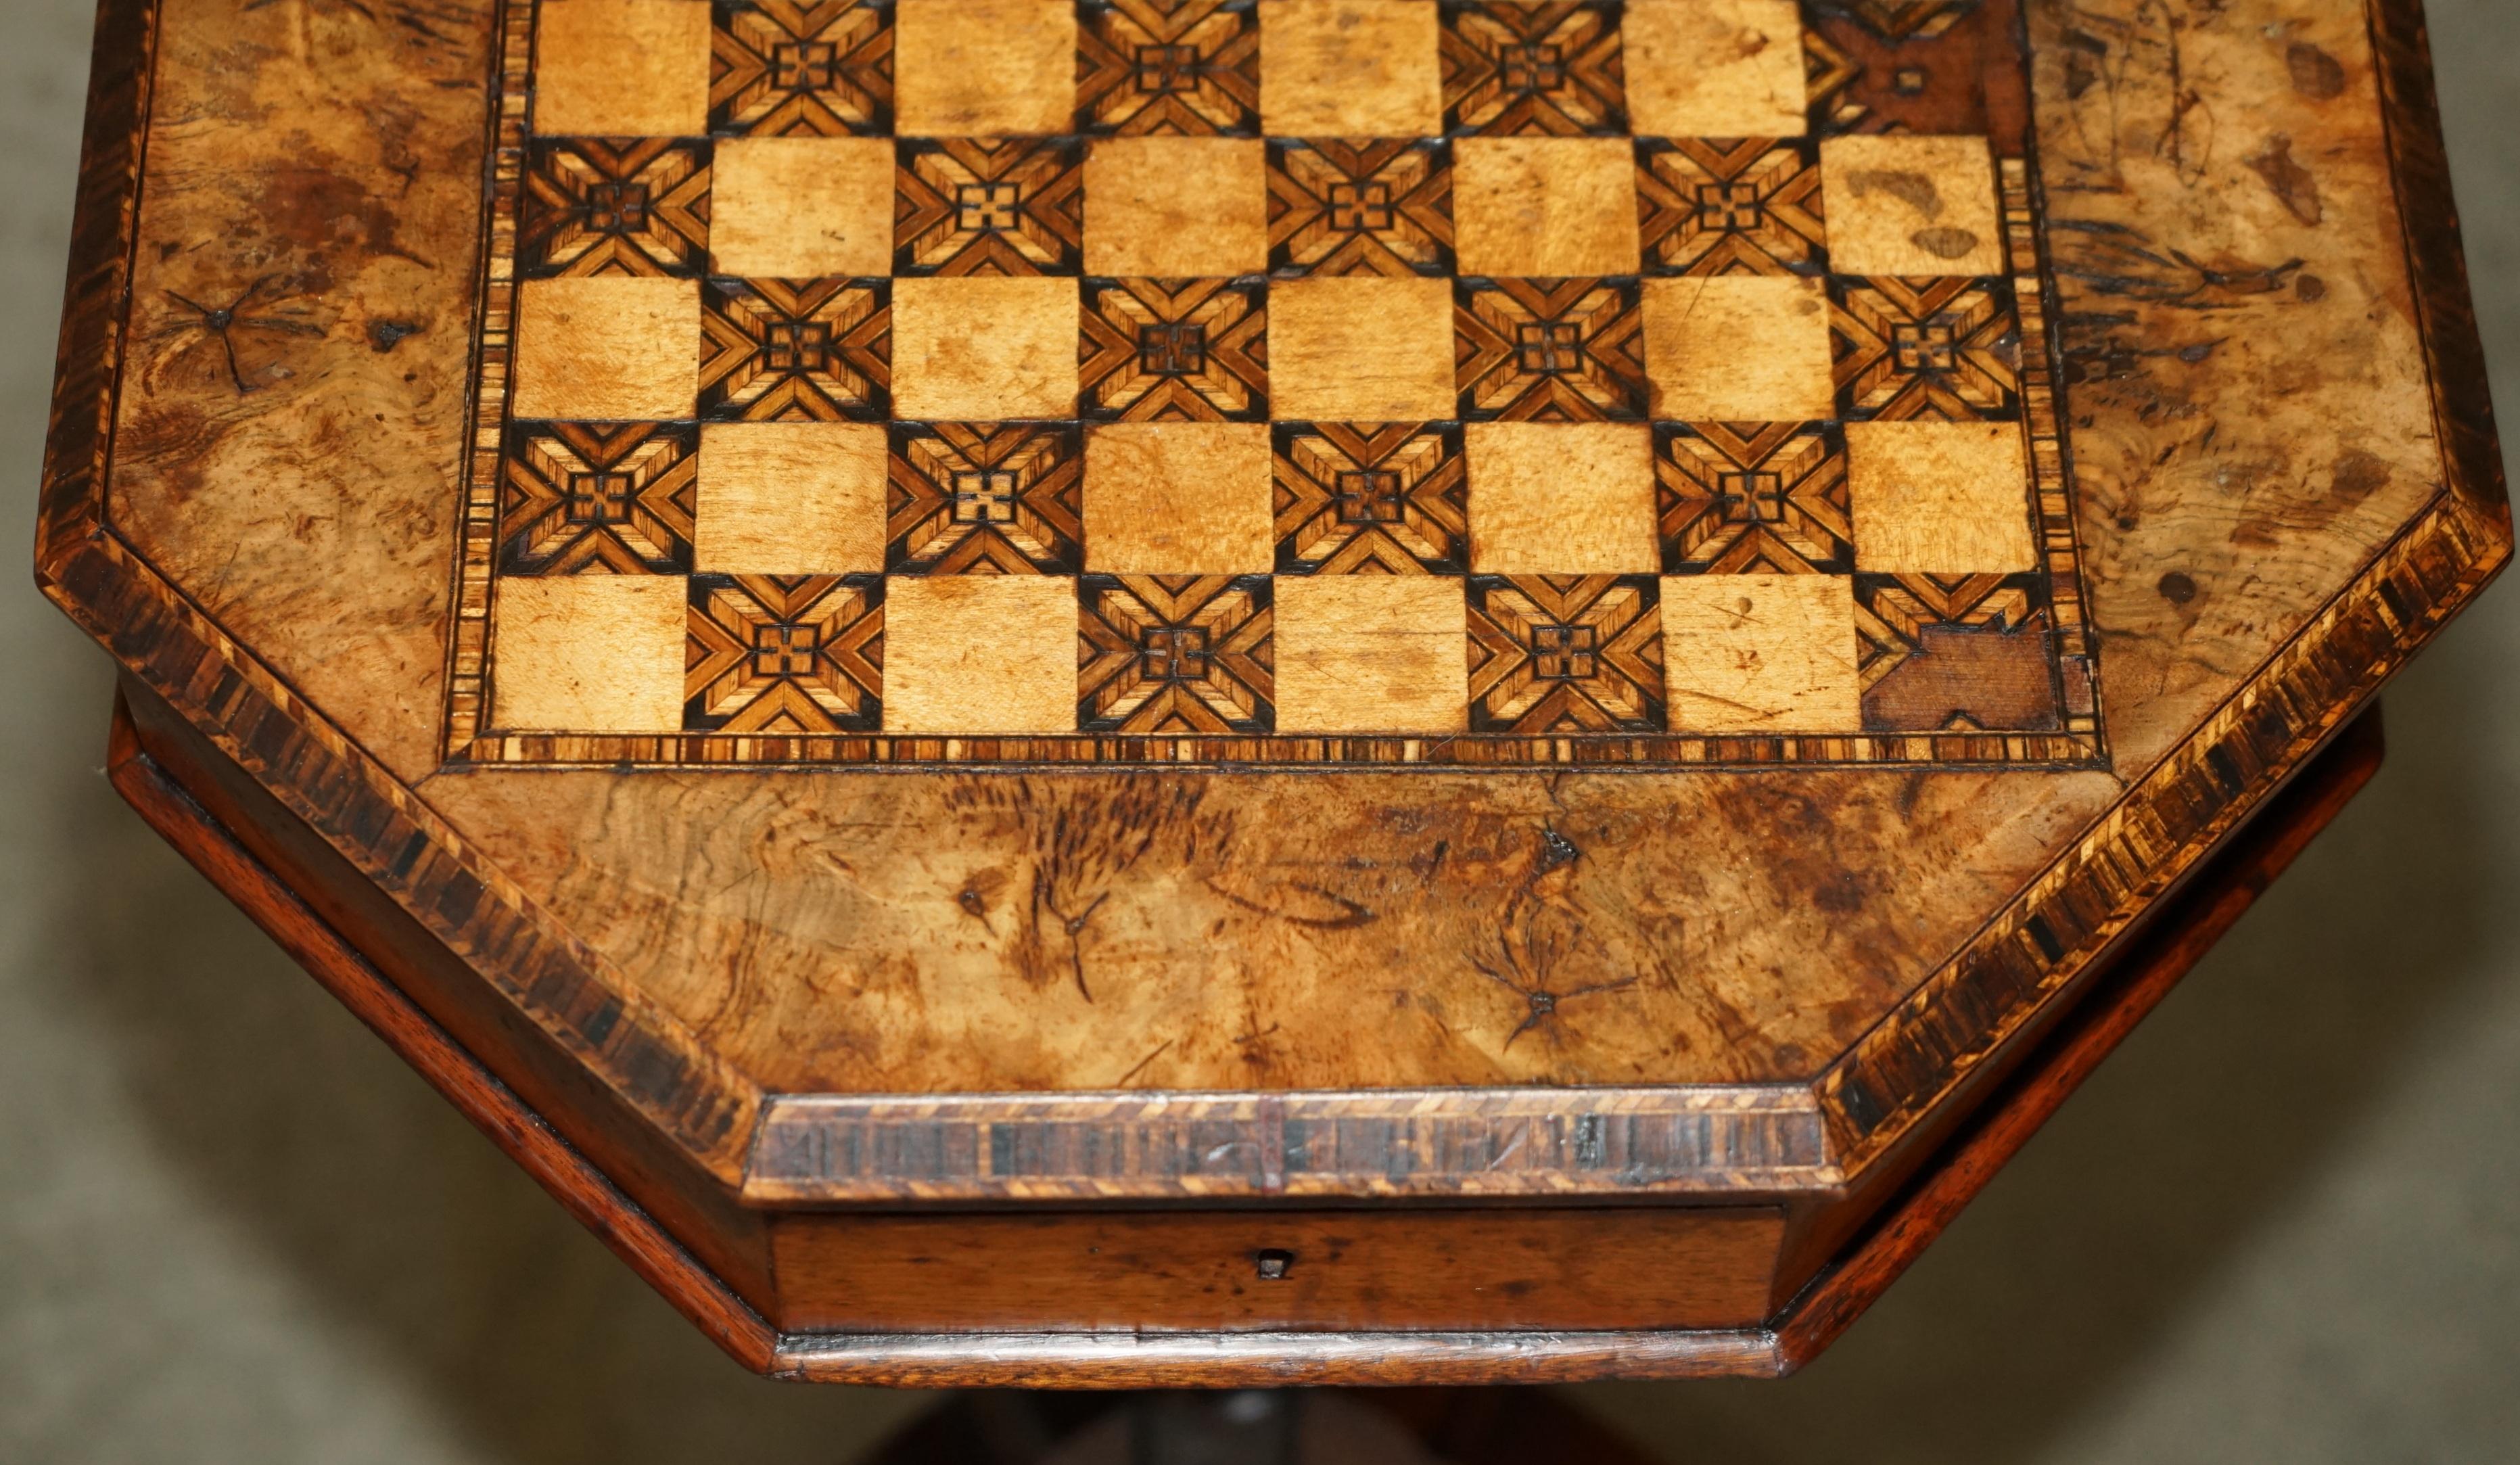 DISTRESsed ANTIQUE BURR WALNUT & HARDWOOD SEWiNG WORK TABLE CHESS BOARD TOP (Hartholz) im Angebot